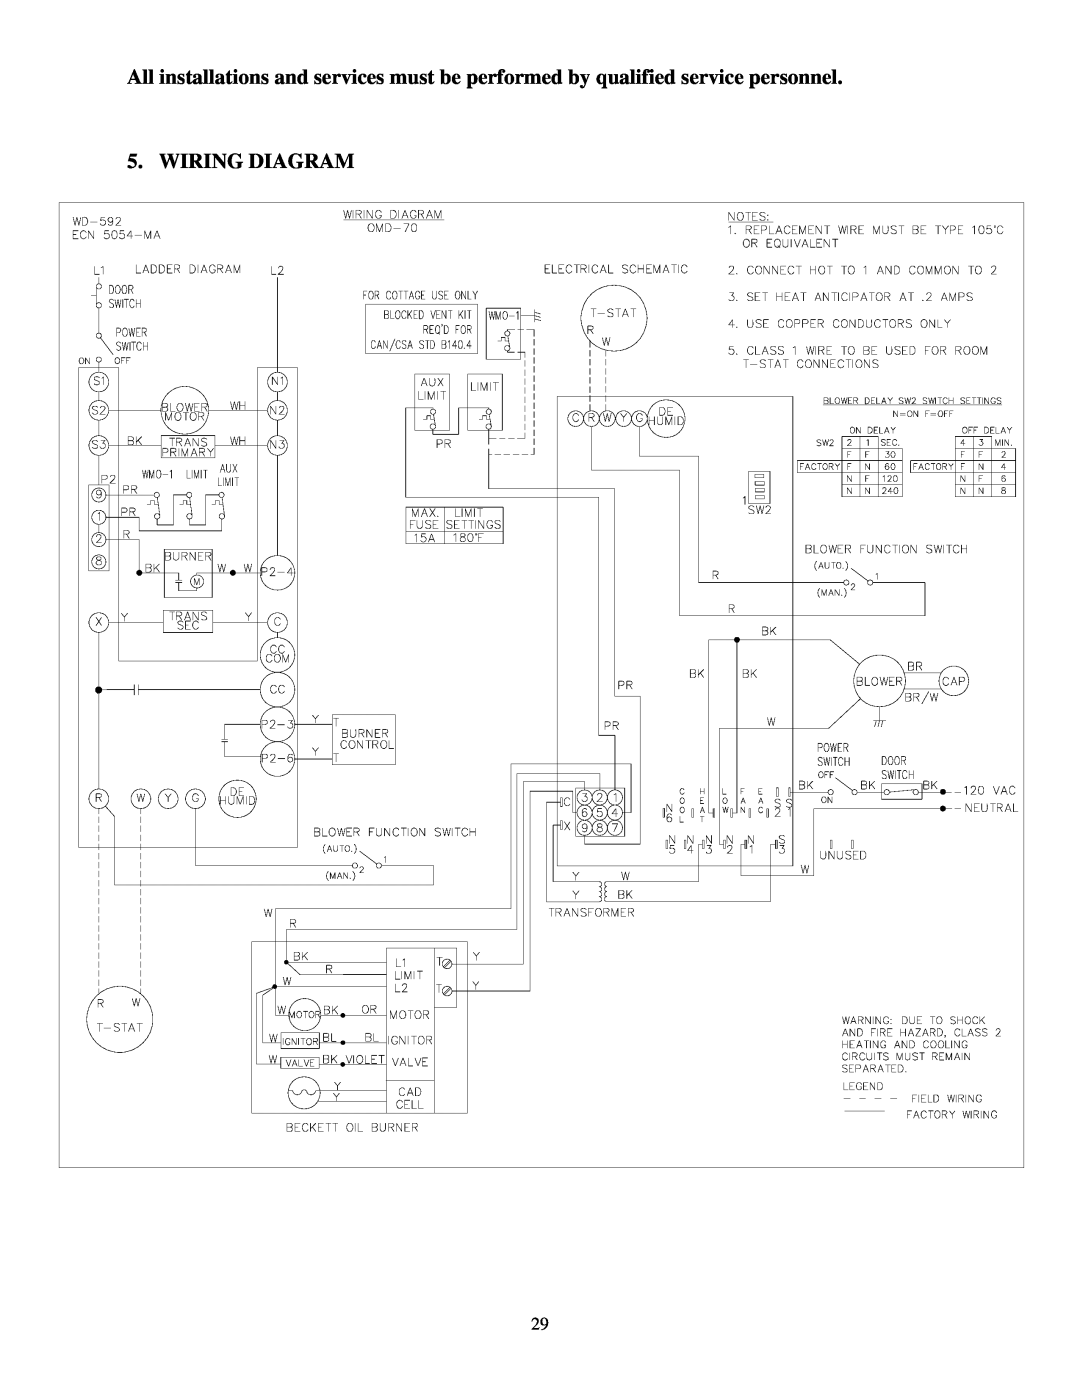 Thermo Products omd-70 service manual Wiring Diagram 